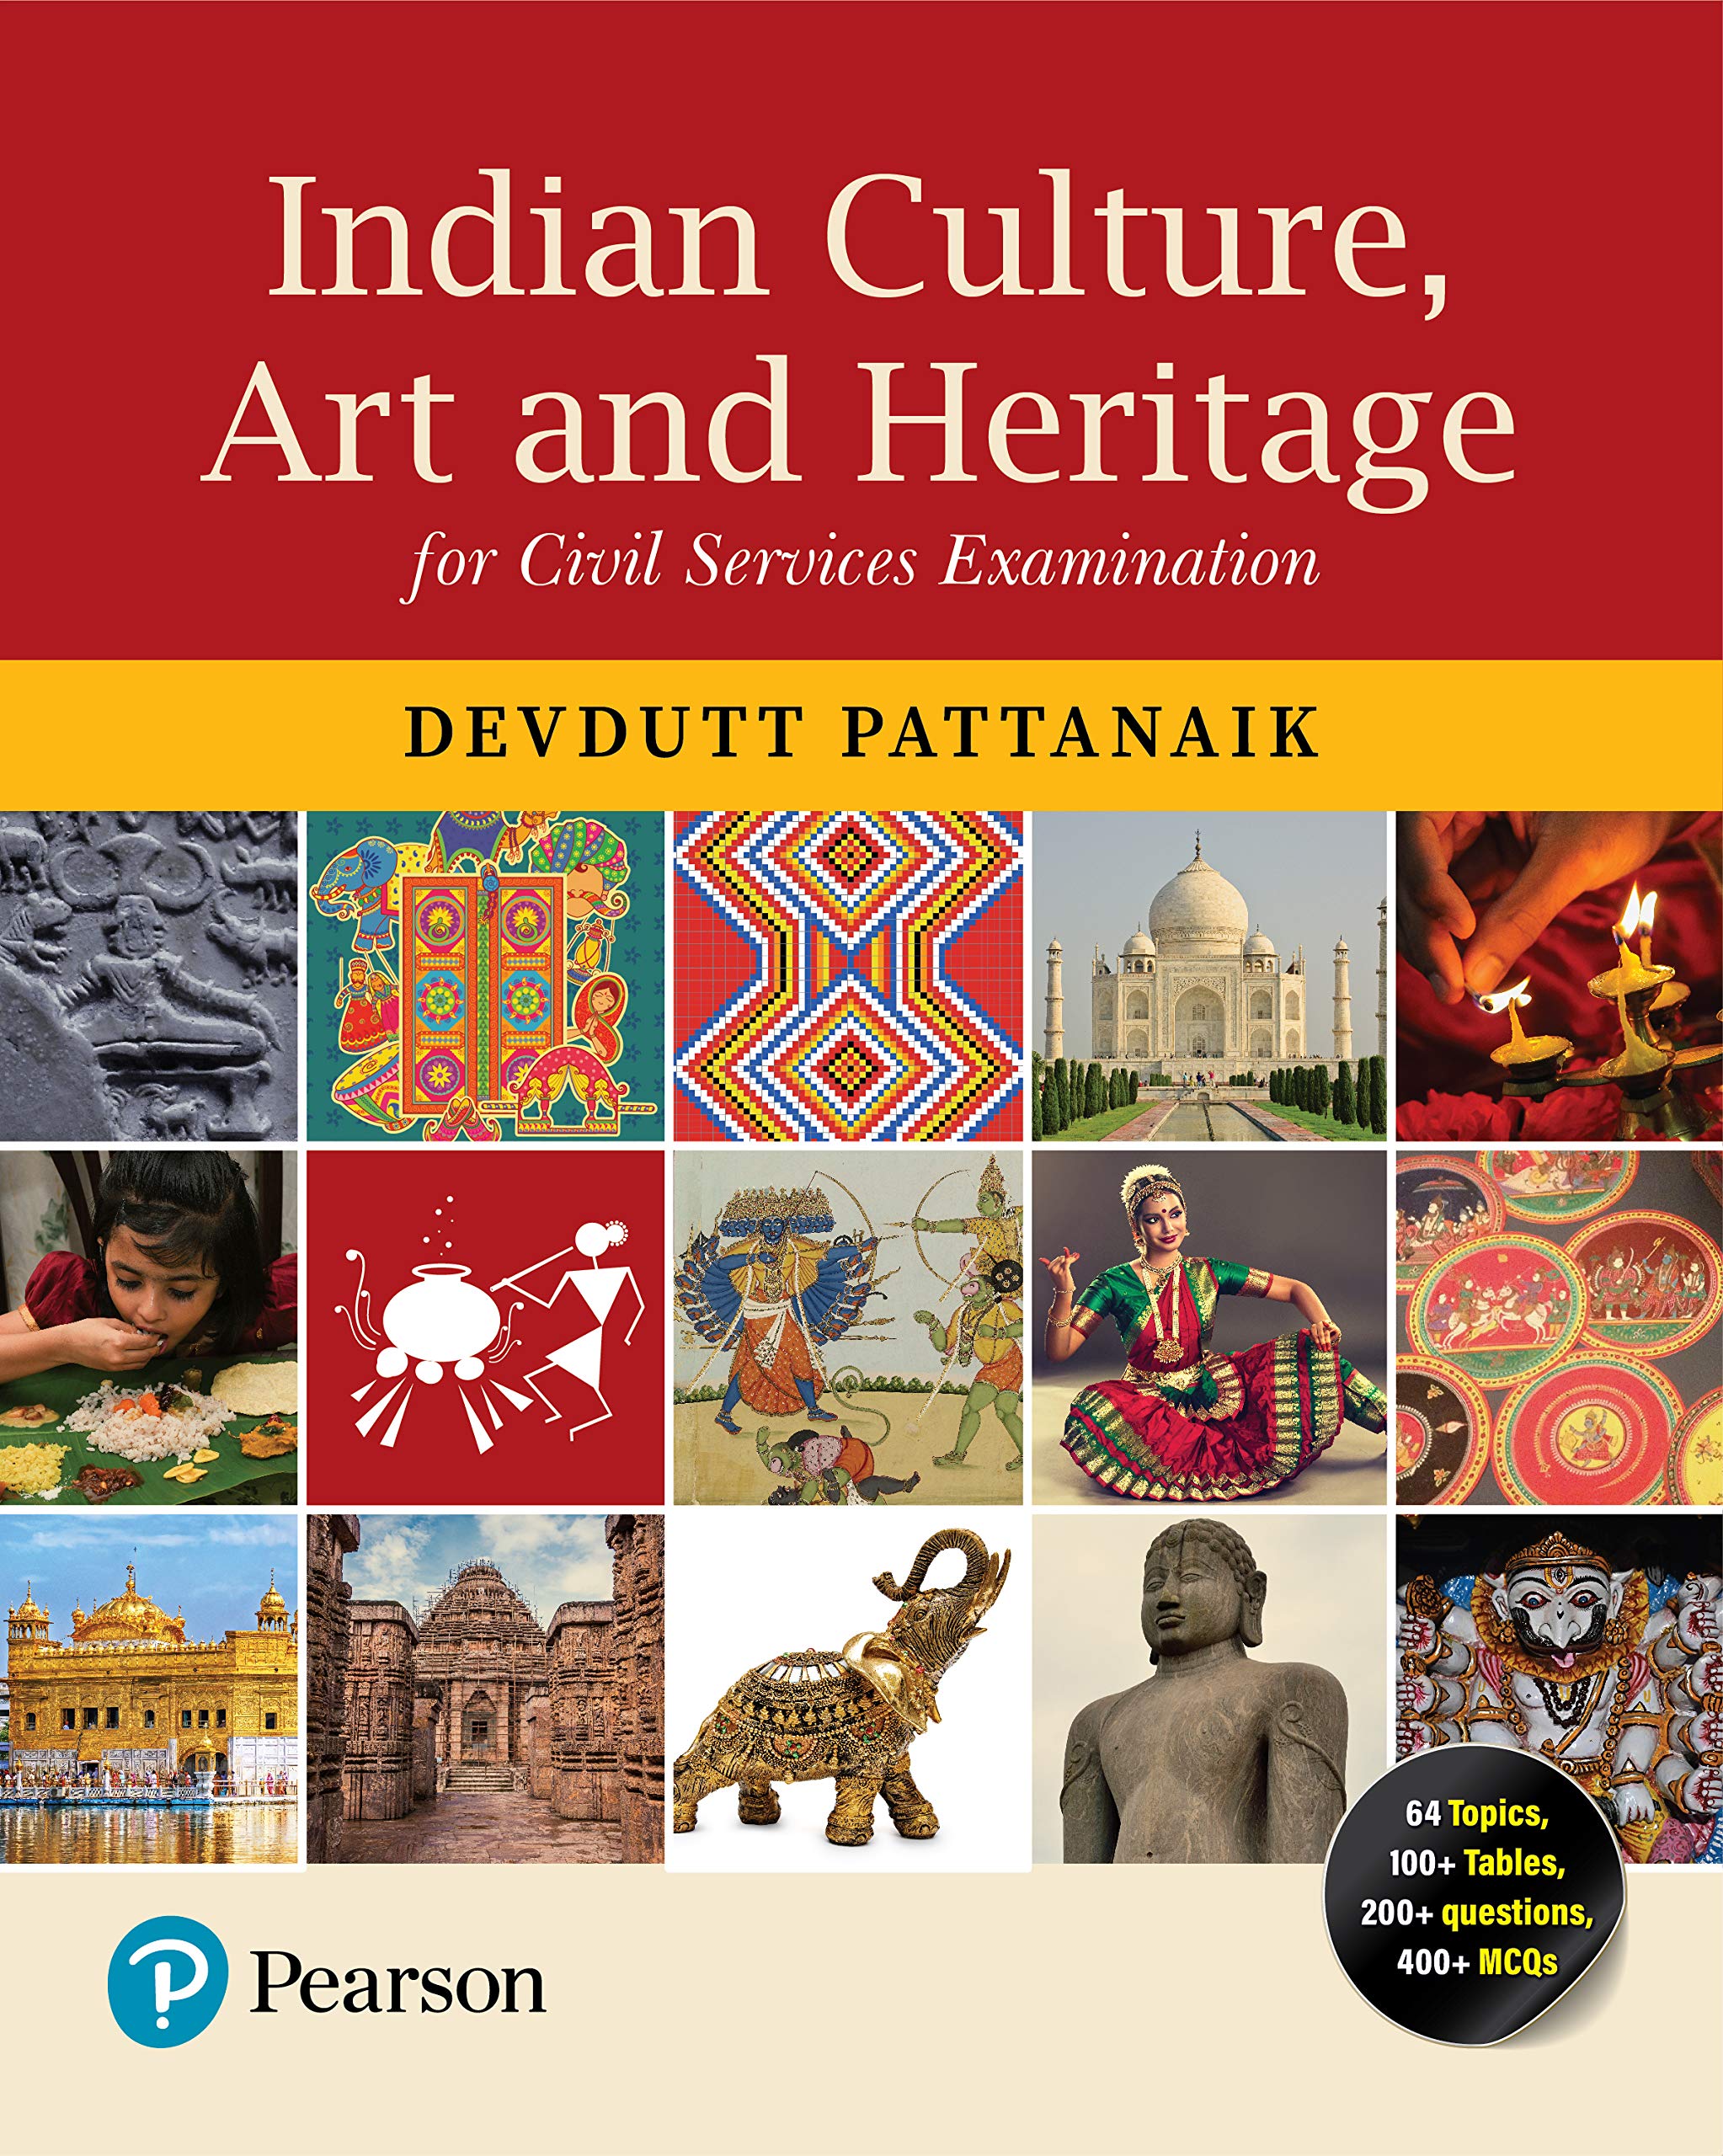 poster making on indian culture and heritage